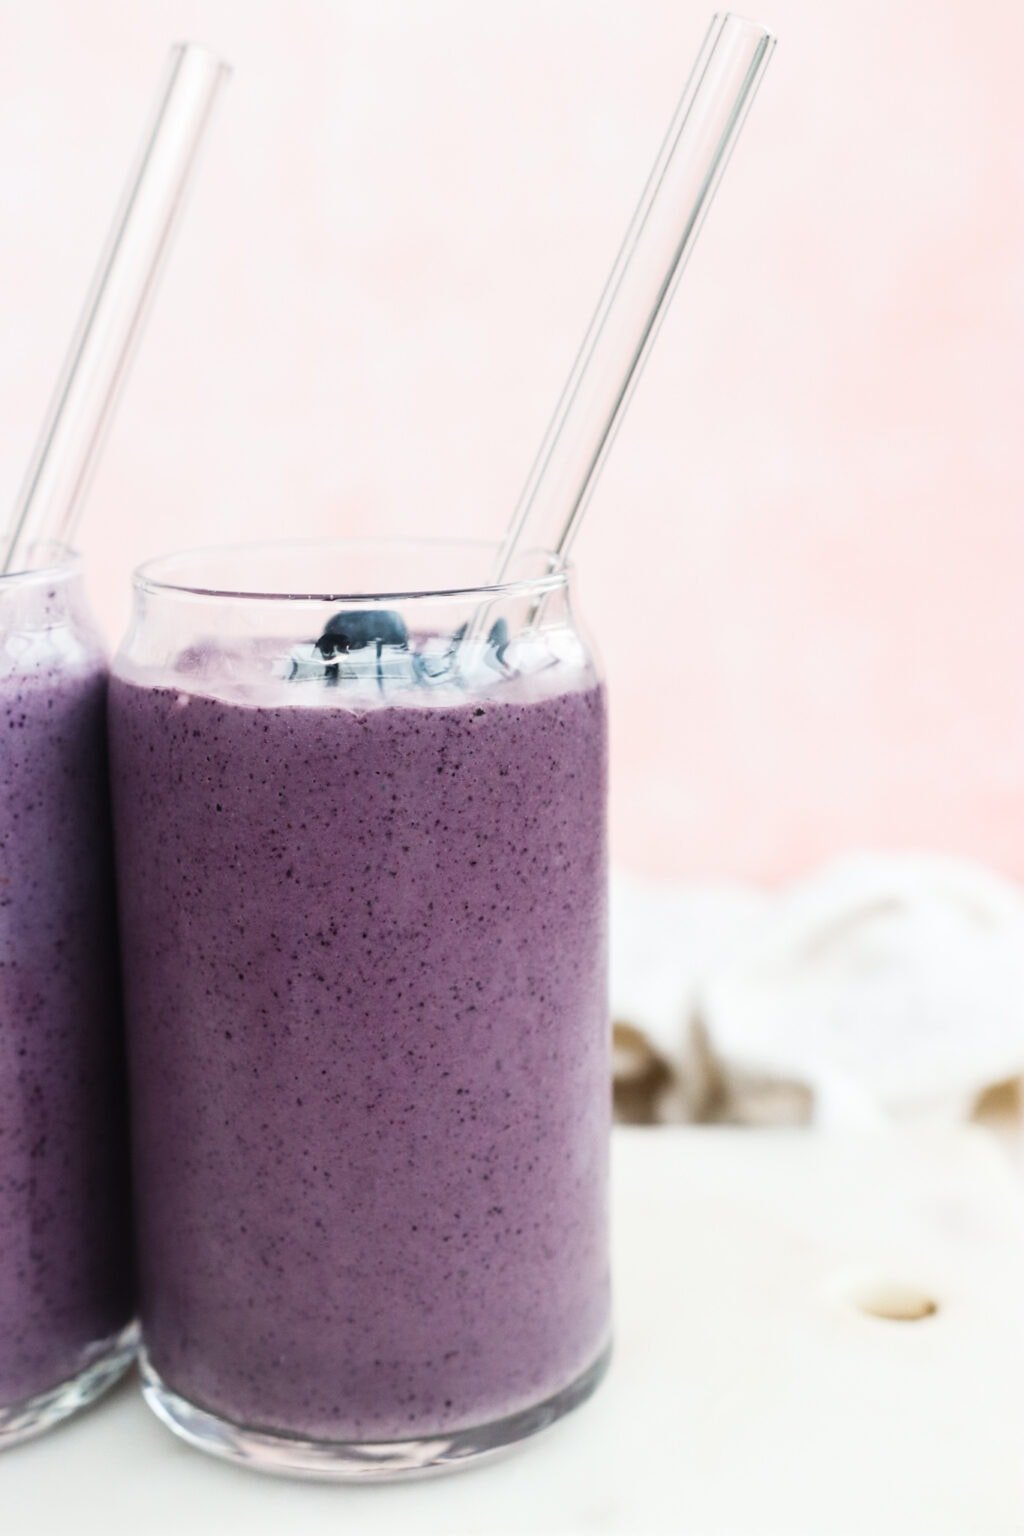 Two clear glasses filled with High Protein Blueberry Breakfast Smoothie with Cottage Cheese